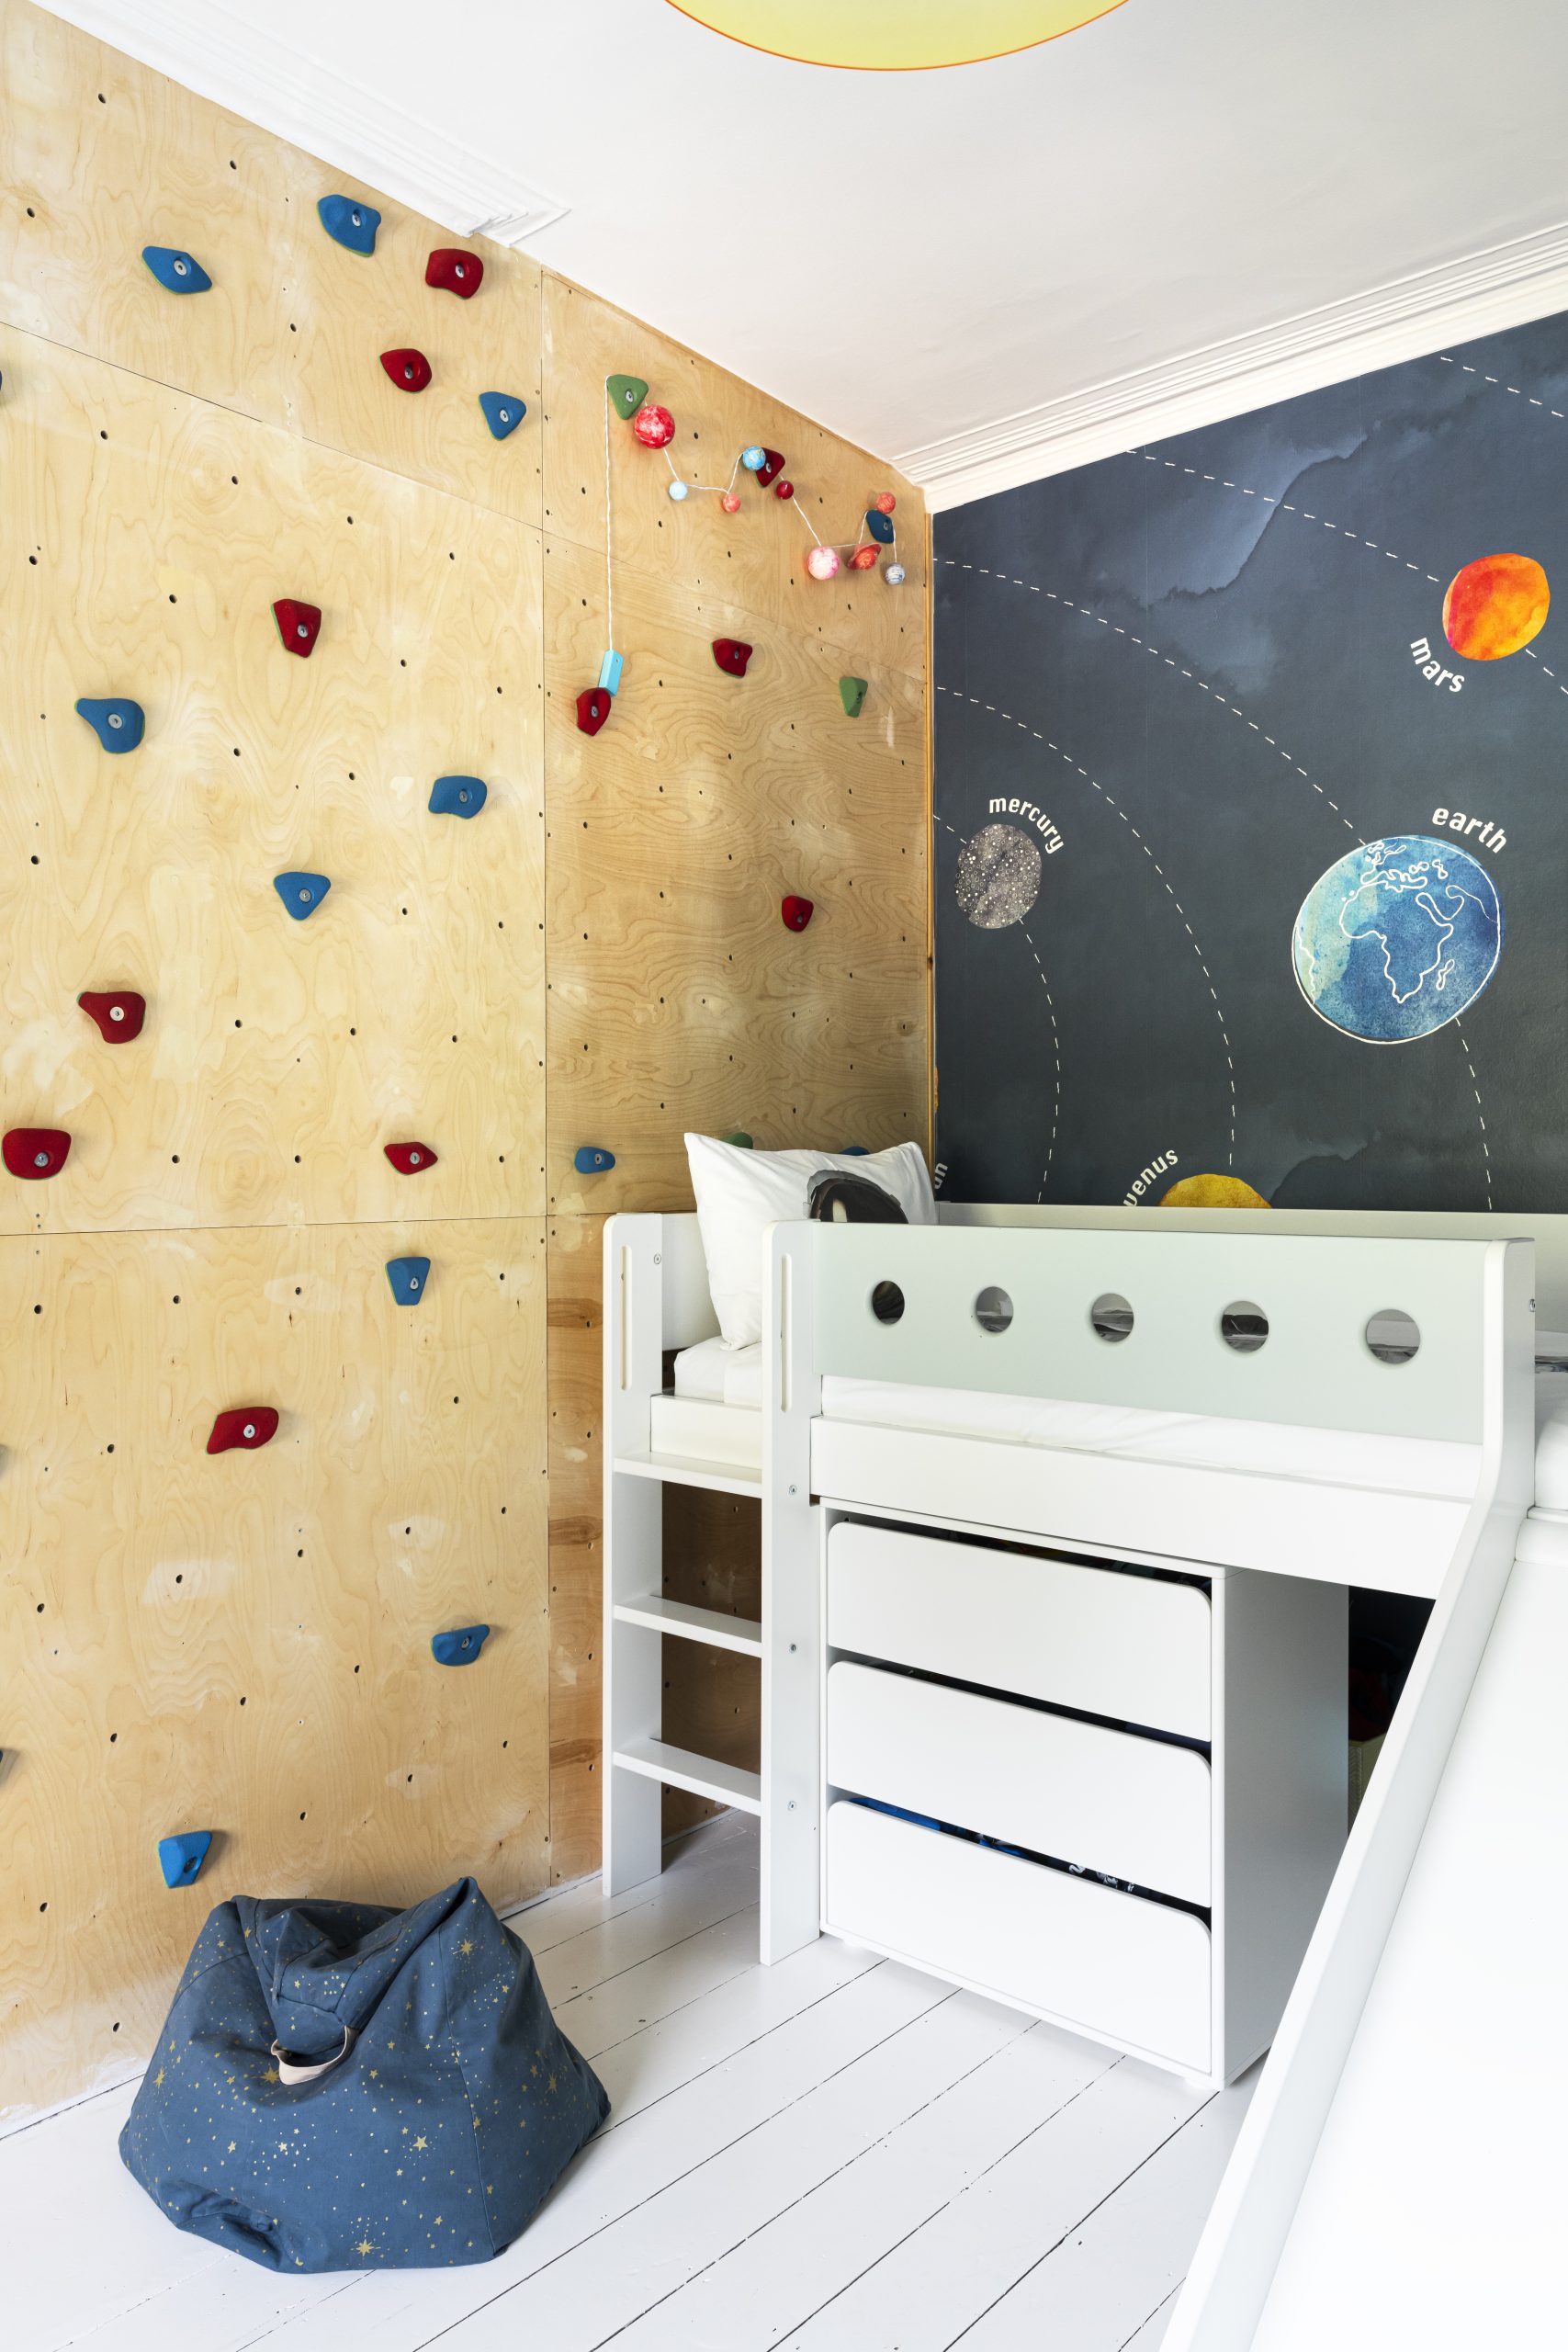 Climbing wall in boy's bedroom home design